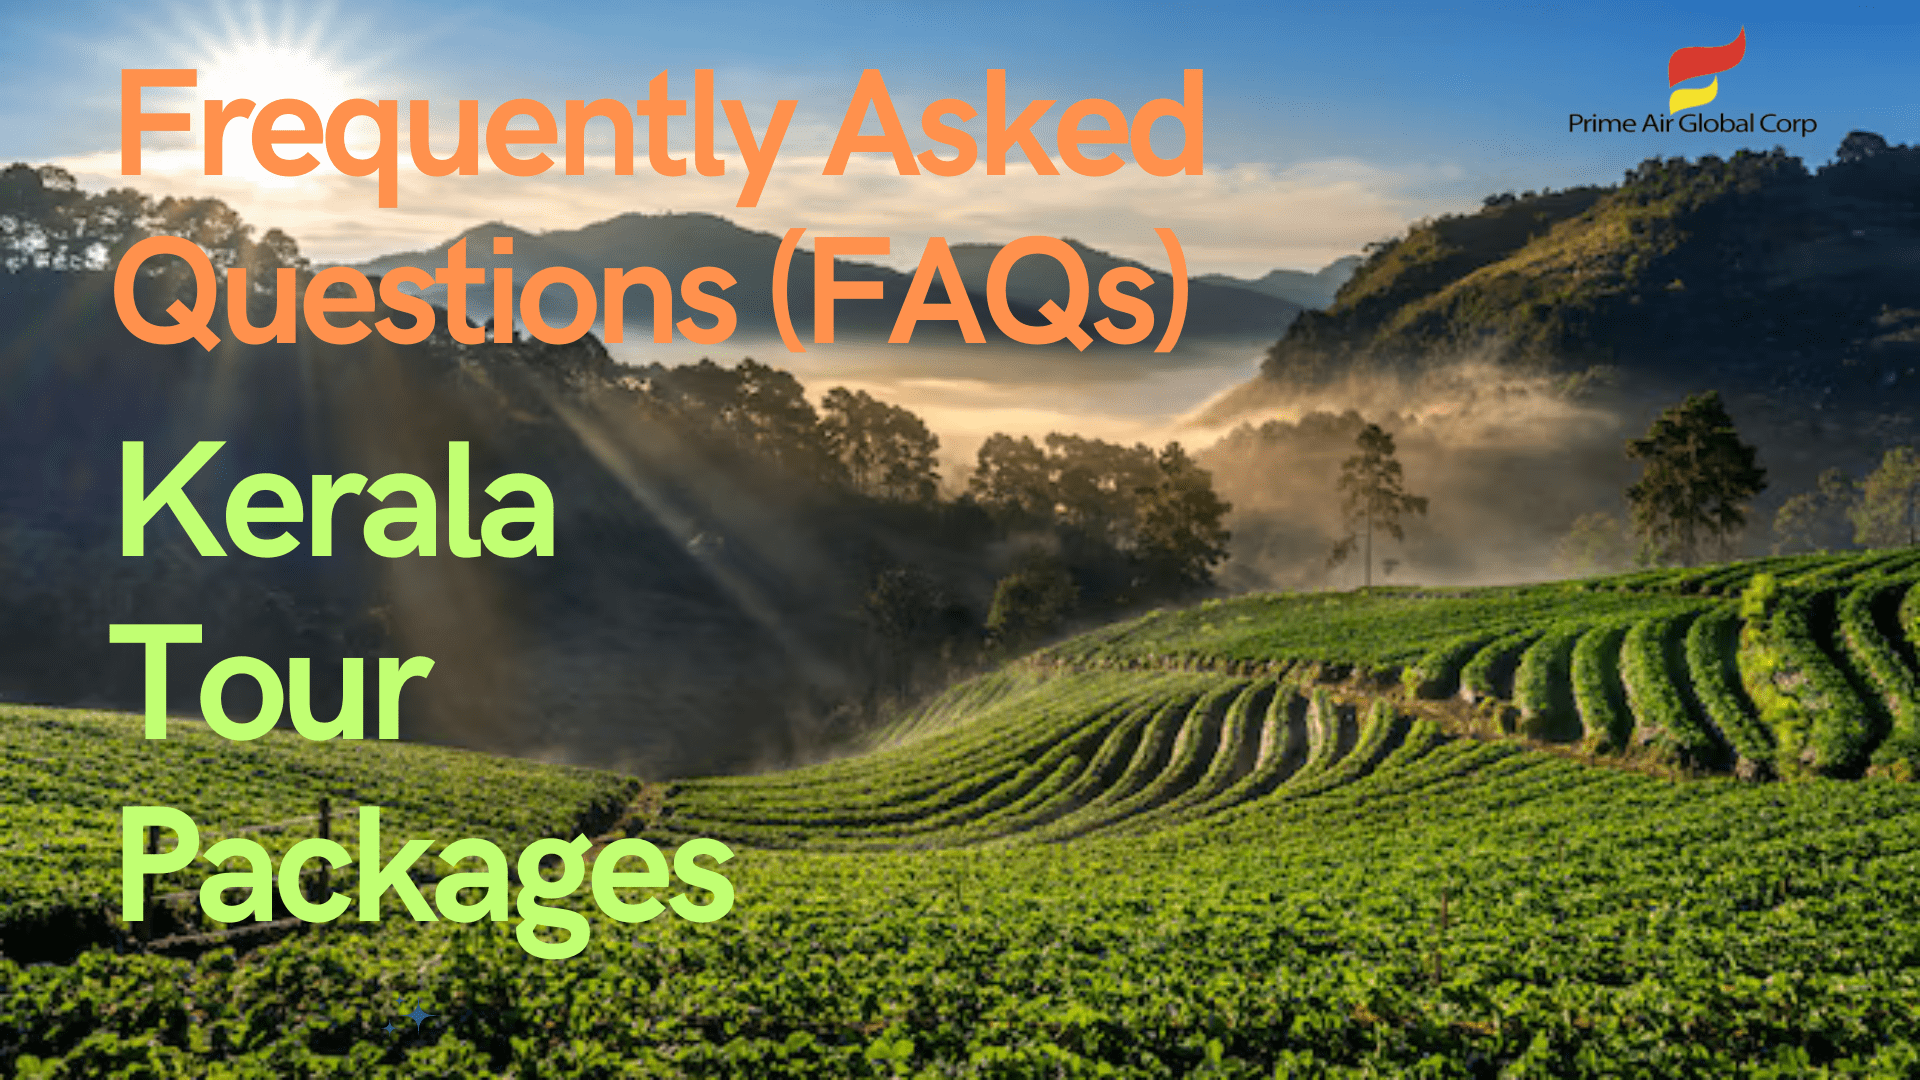 Frequently Asked Questions (FAQs) for Kerala Tour Packages